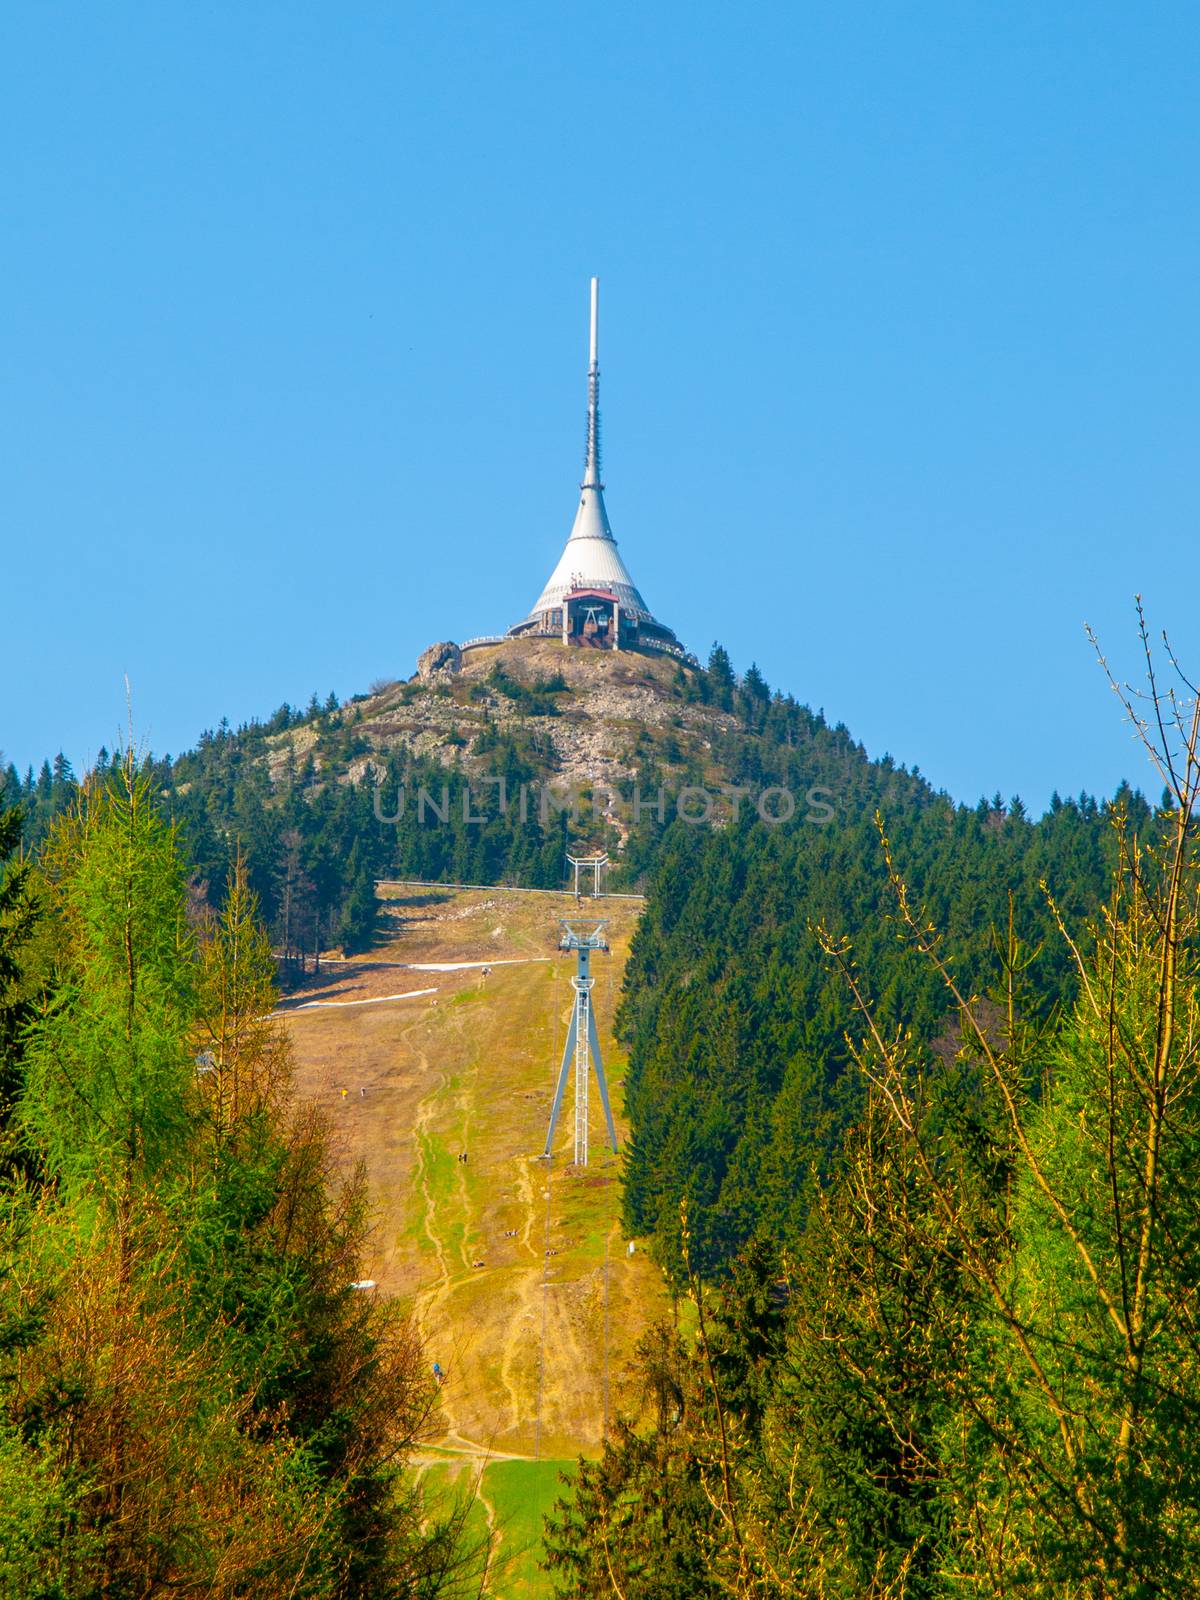 Jested - unique architectural building. Hotel and TV transmitter on the top of Jested Mountain, Liberec, Czech Republic.